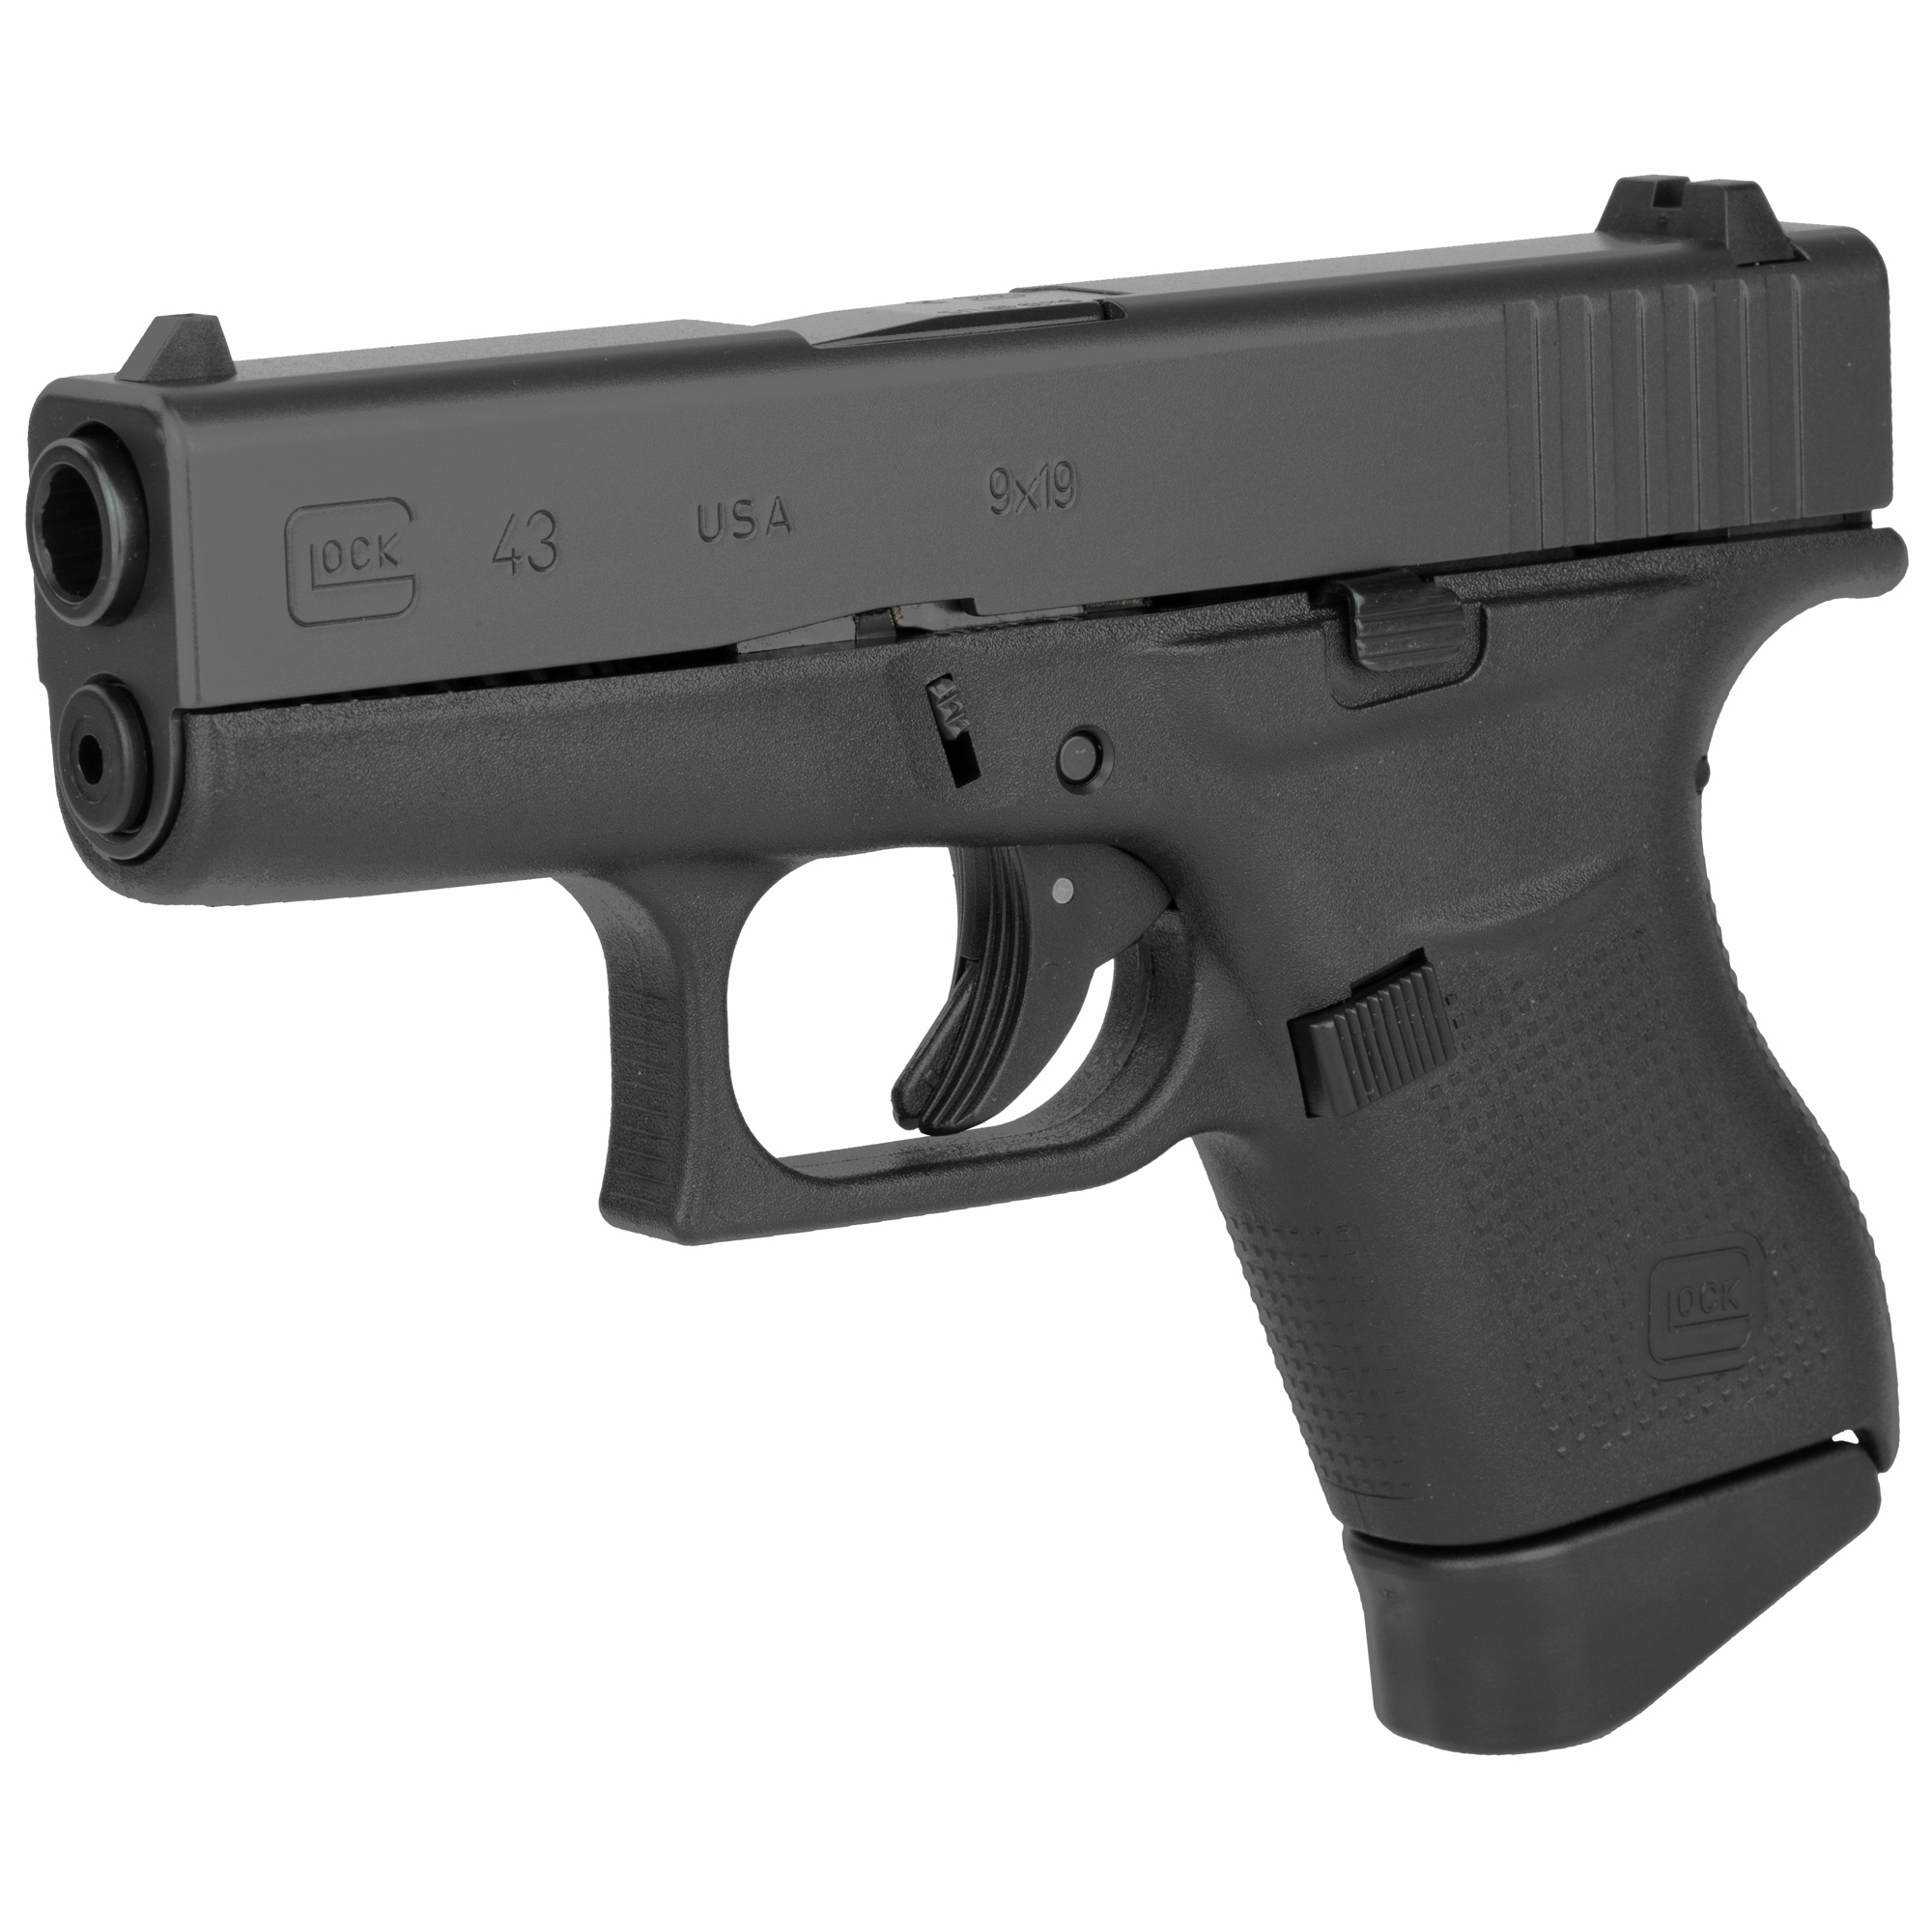 Glock, 43, Striker Fired, Semi-automatic, Polymer Frame Pistol, Sub-Compact, 9MM, 3.41" Barrel, Matte Finish, Black, No Finger Grooves, Fixed Sights, 6 Rounds, 2 Magazines